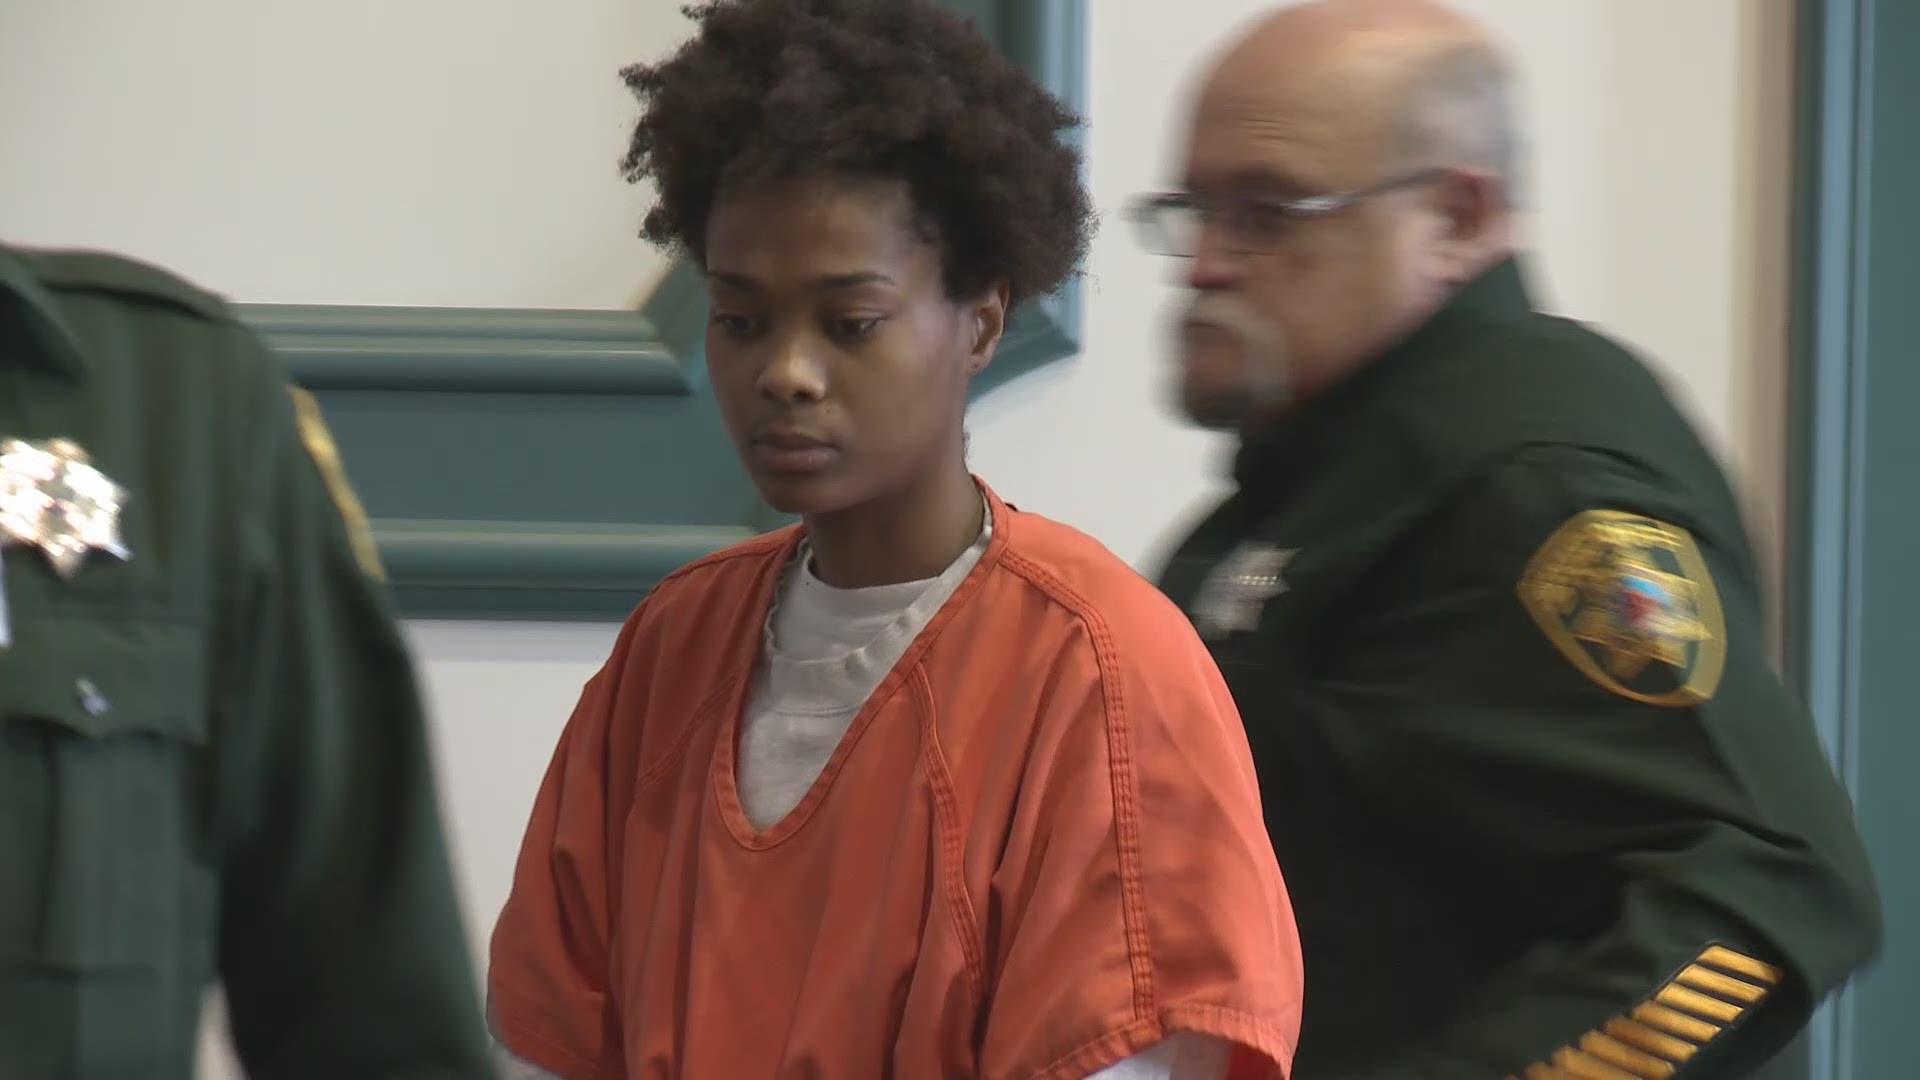 Chanda Lilly makes her initial court appearance at Sagadahoc County Superior Court in Bath.